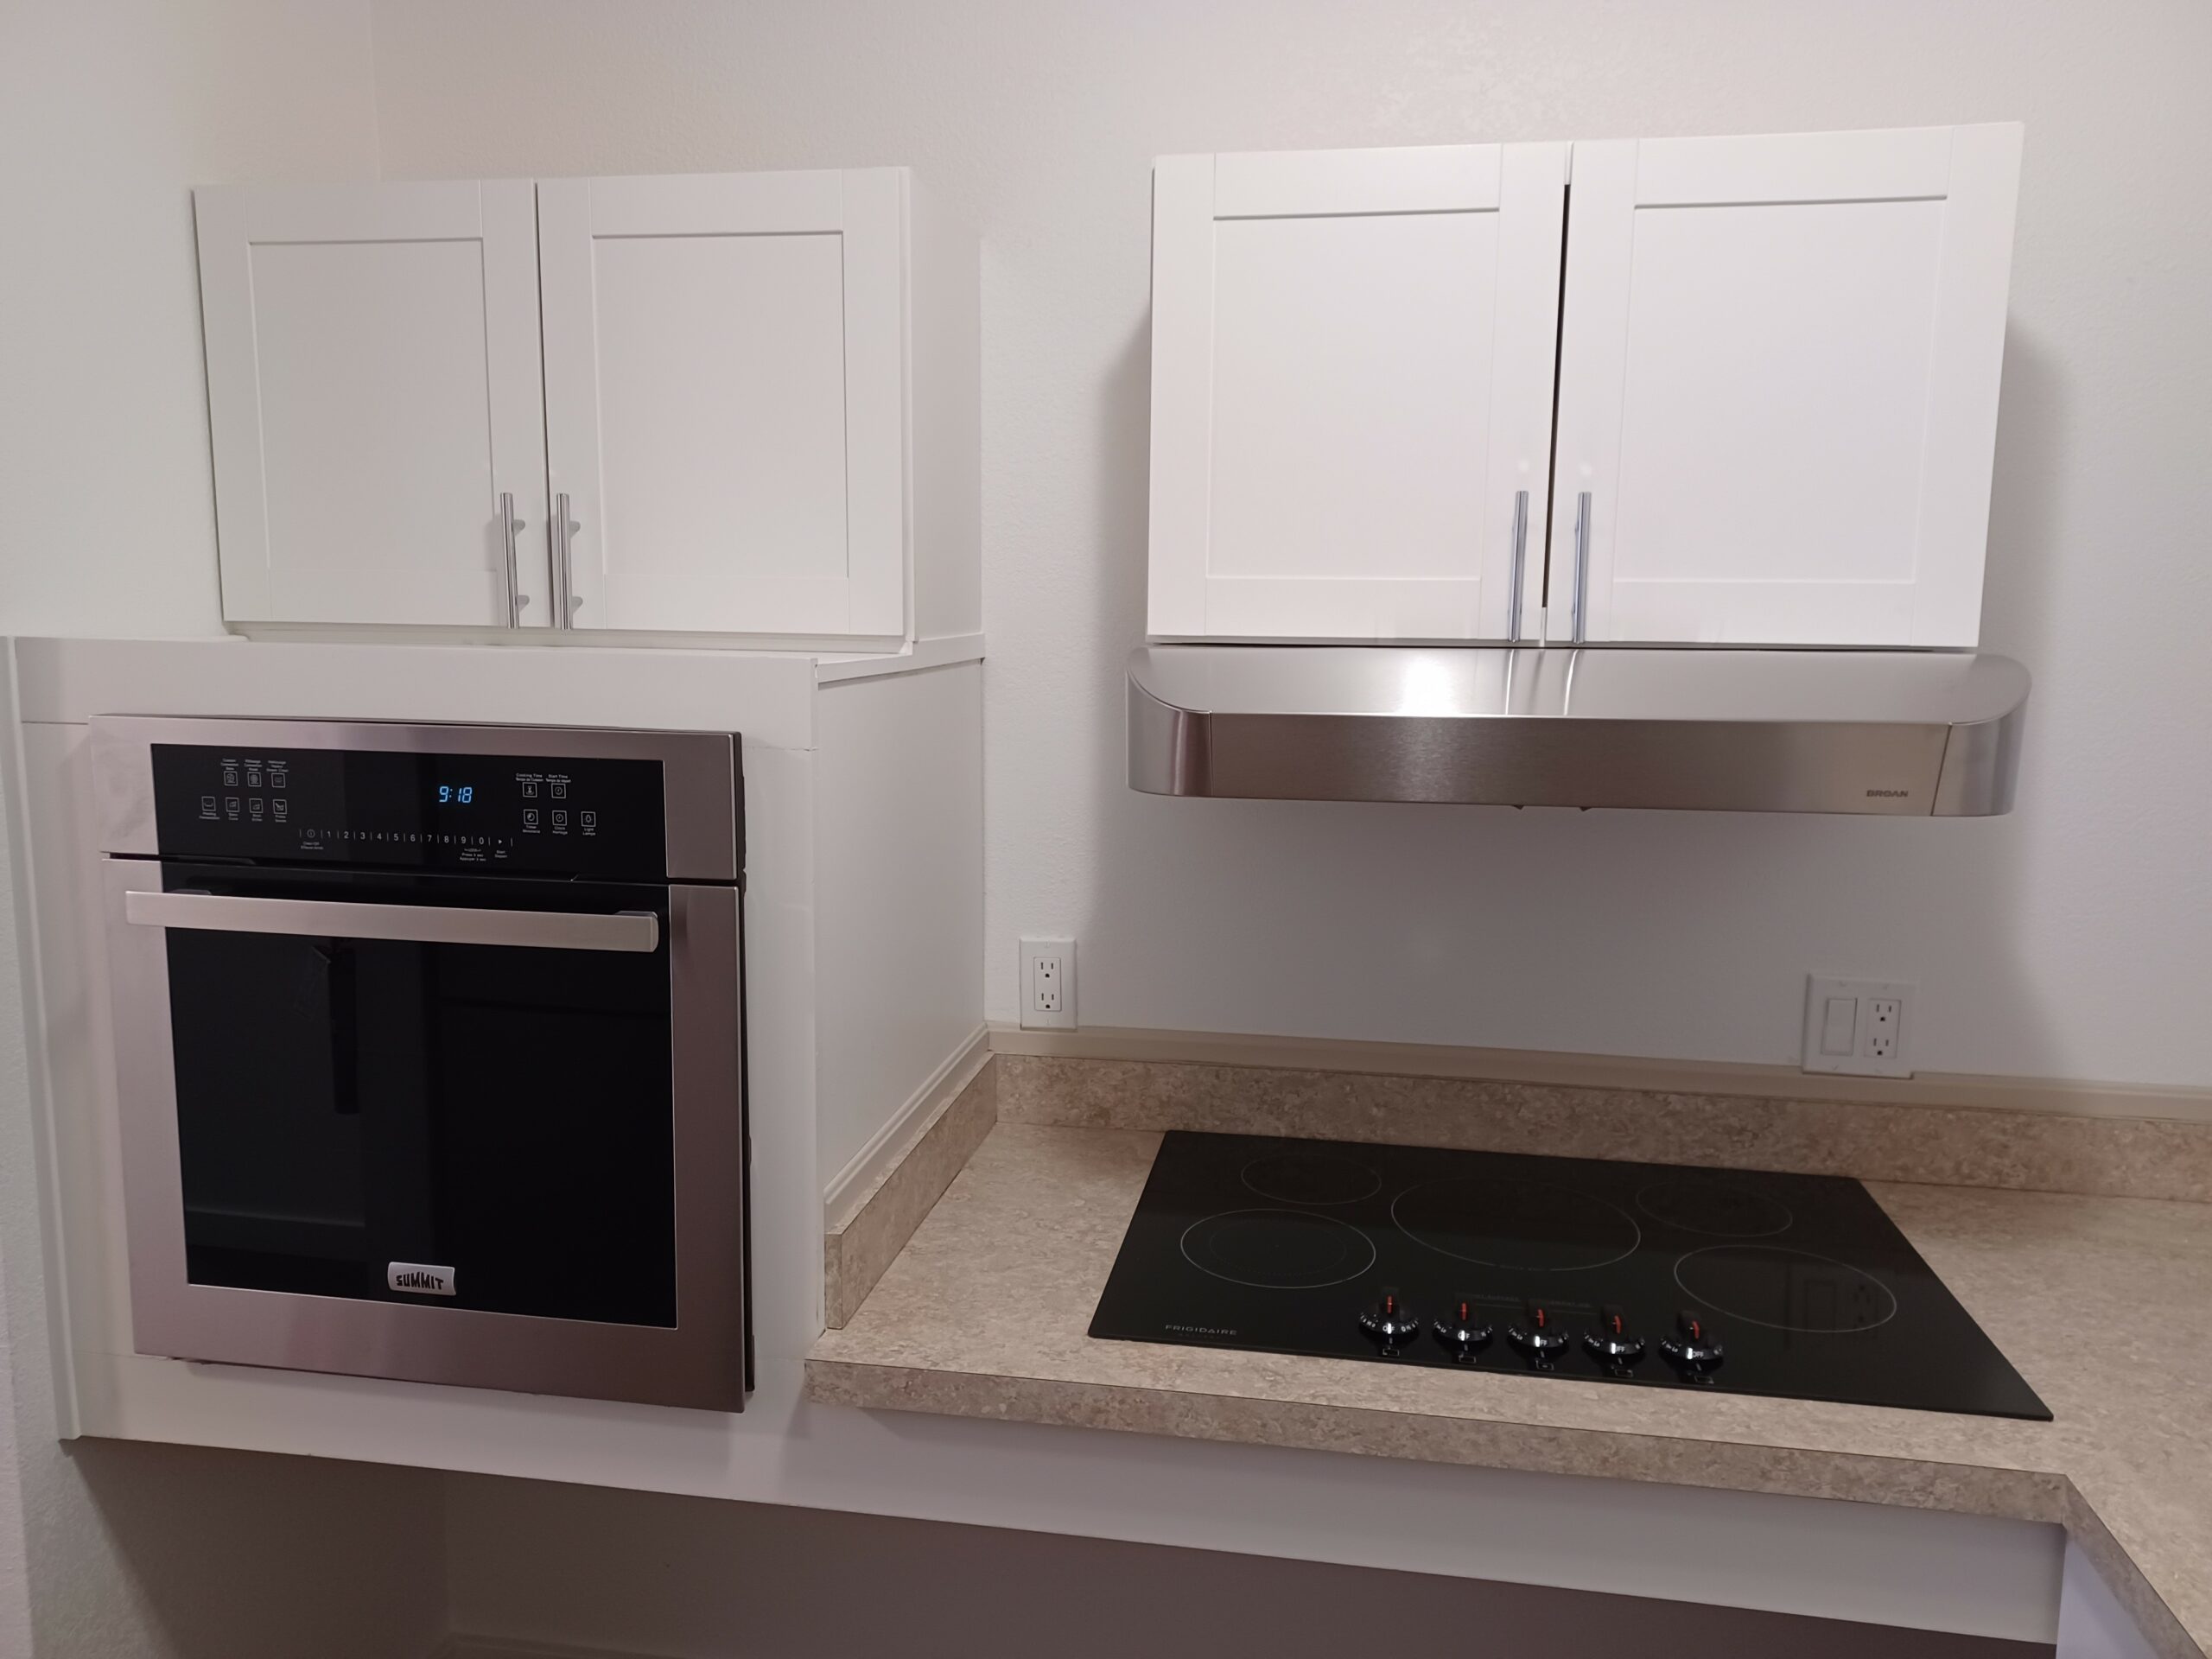 Accessible Oven and Flat Top Stove